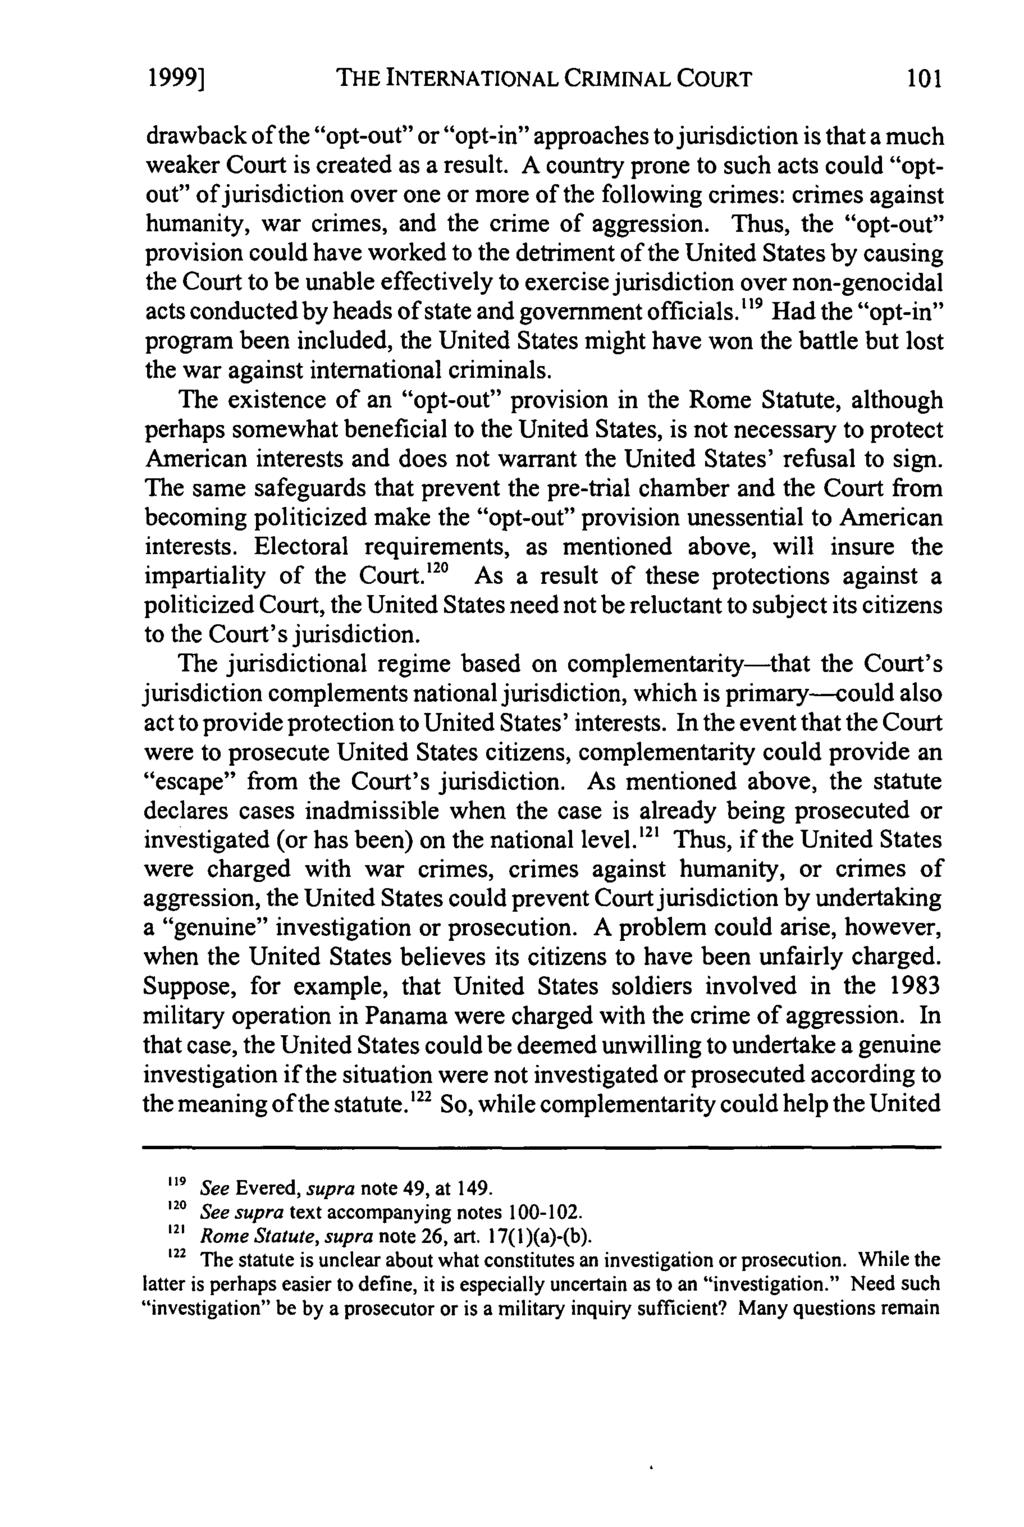 1999] THE INTERNATIONAL CRIMINAL COURT drawback of the "opt-out" or "opt-in" approaches to jurisdiction is that a much weaker Court is created as a result.